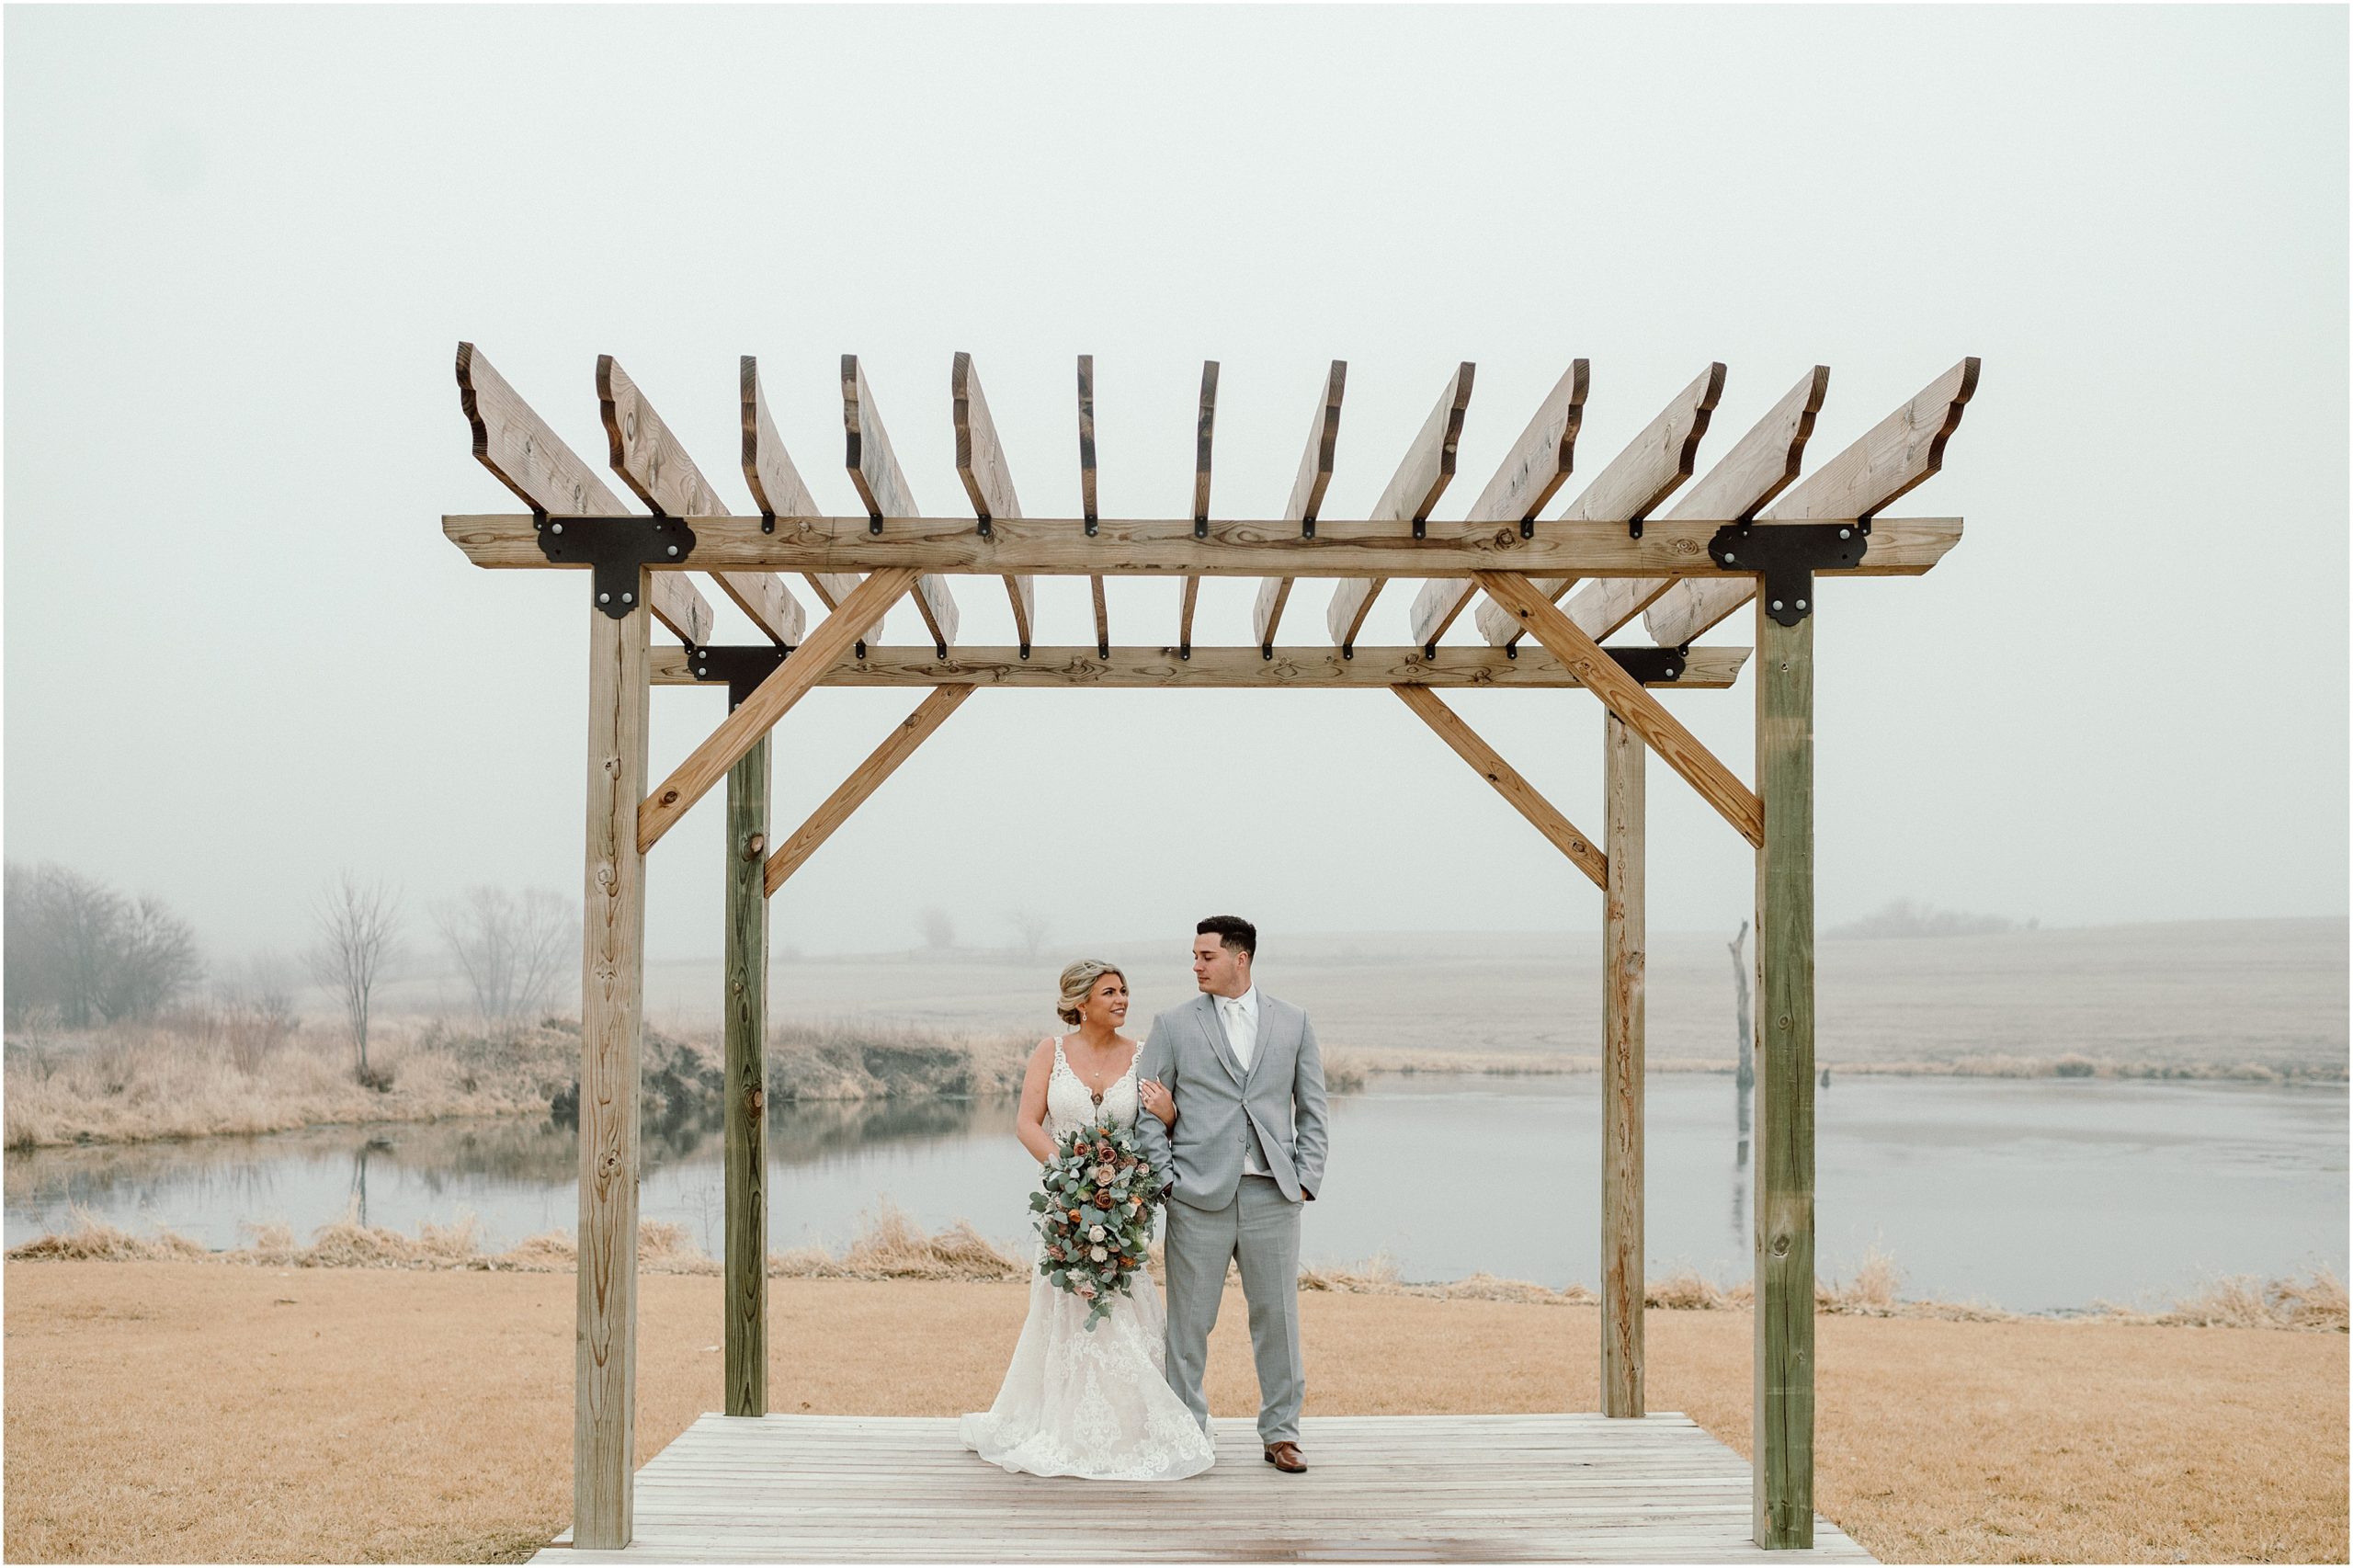 Bride in champegne and white wedding gown and groom in light gray suit with white tie stand and smile at each other underneath the pergola at Sparks Barn, a Nebraska Barn Wedding Venue. Photo by Anna Brace who specializes in Nebraska Wedding Photography.